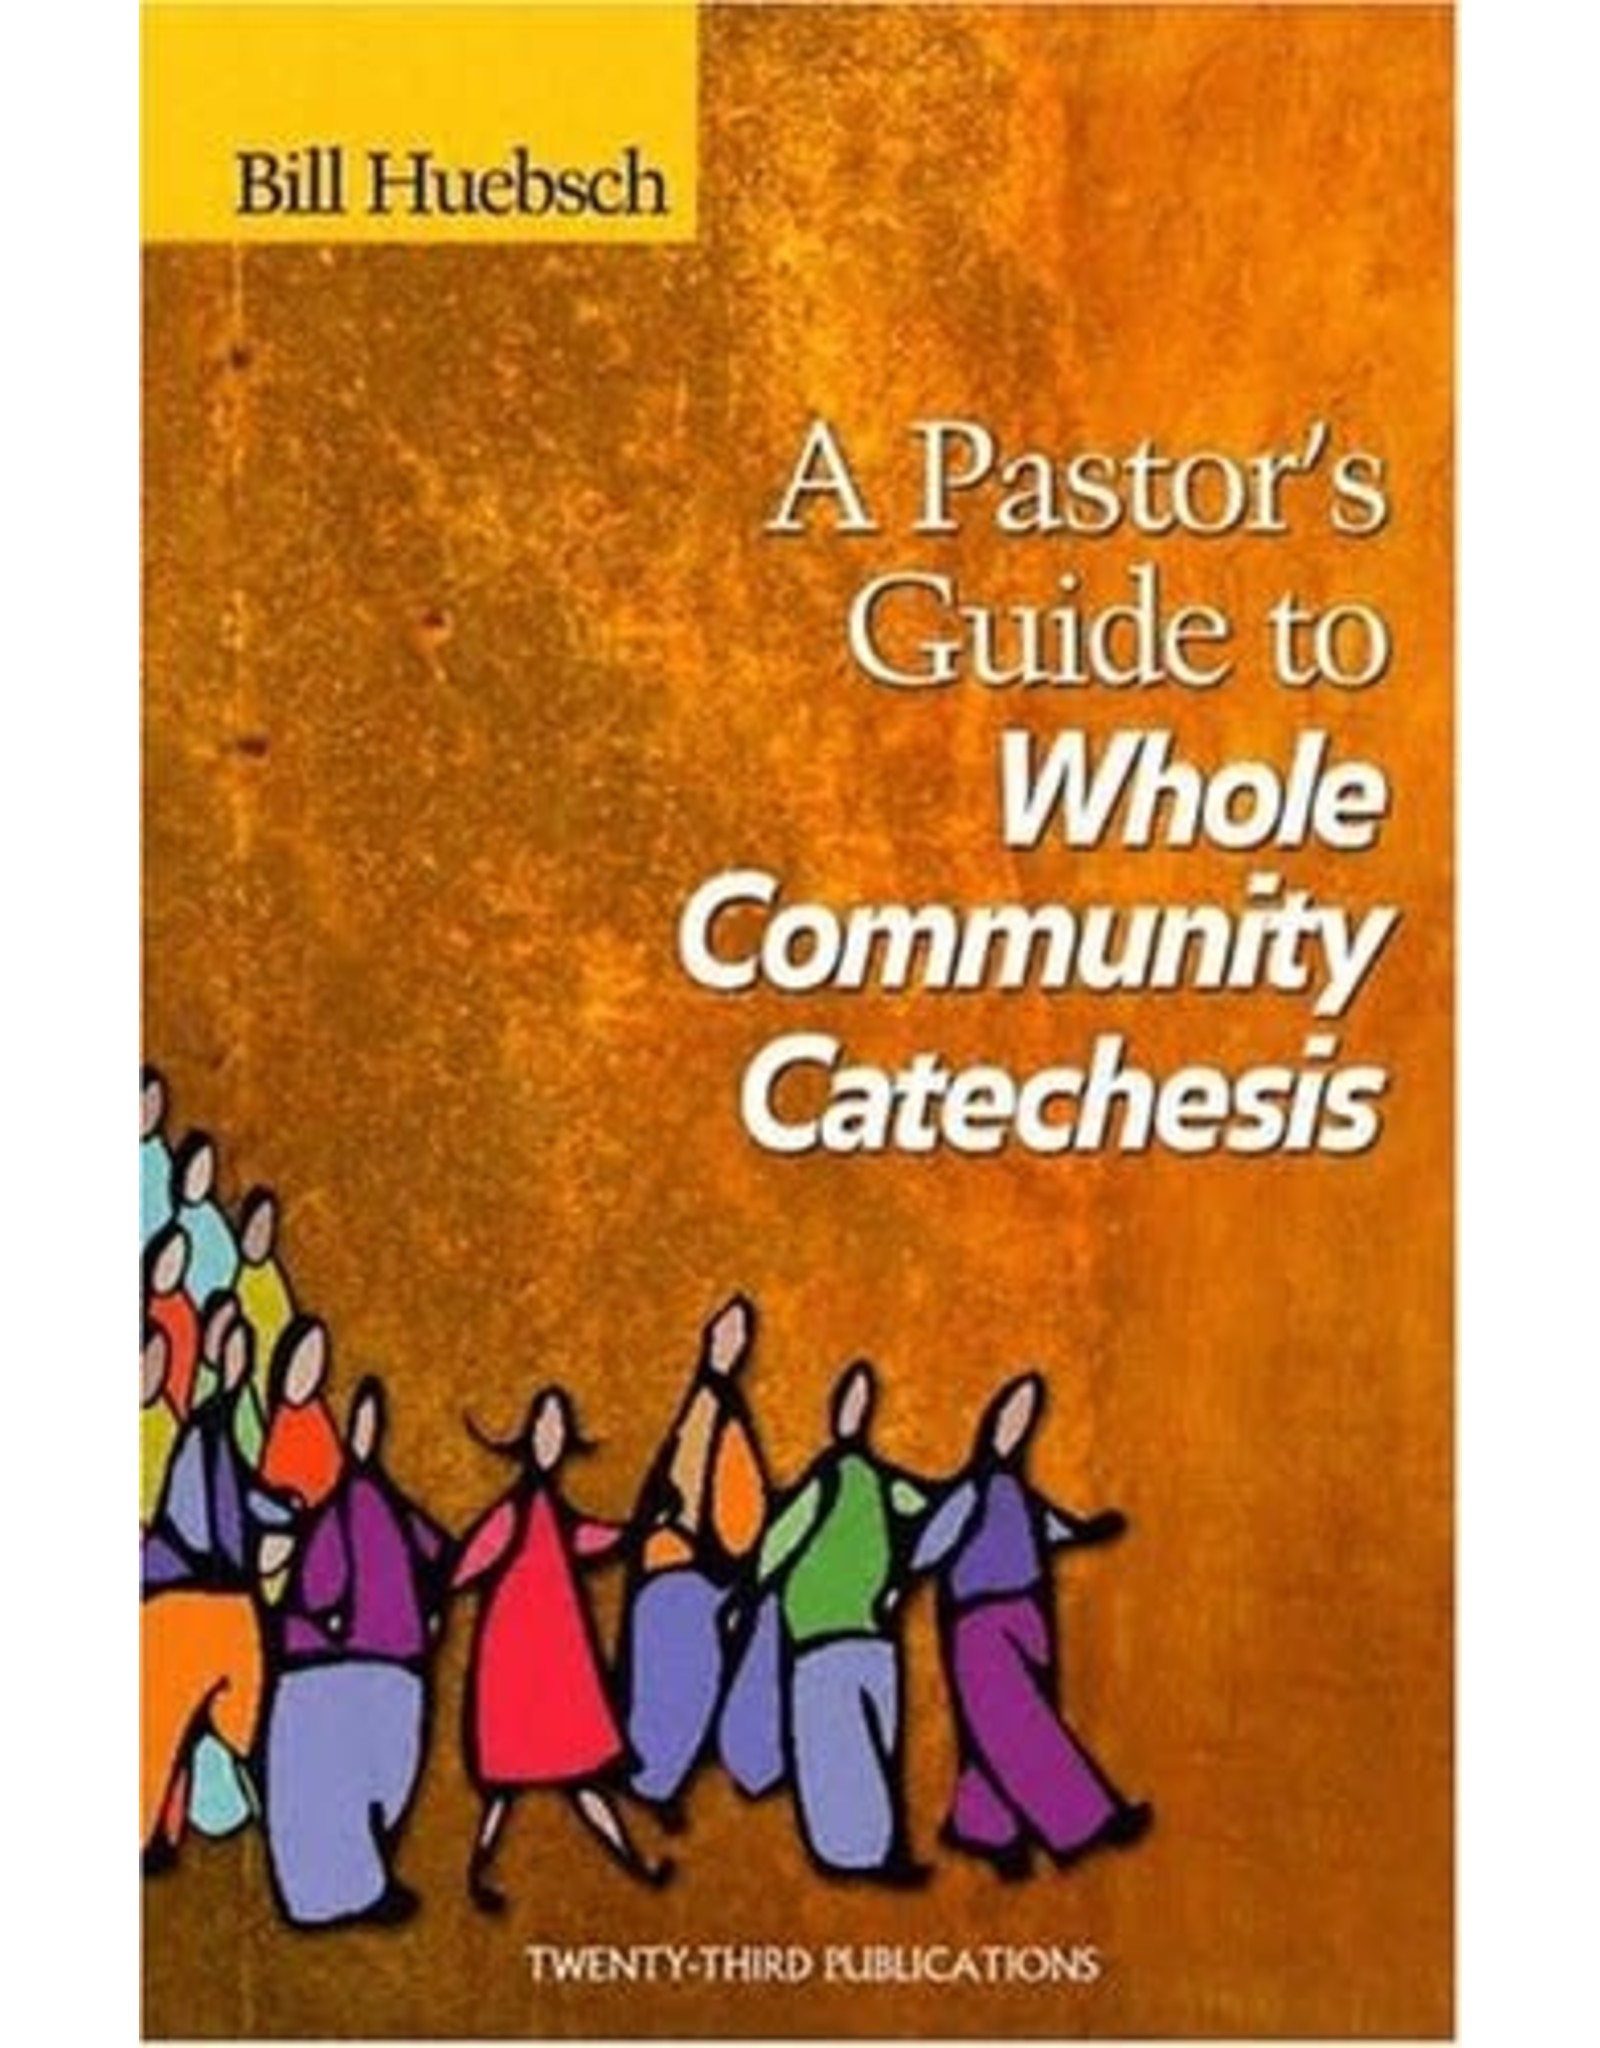 A Pastor's Guide to Whole Community Catechesis